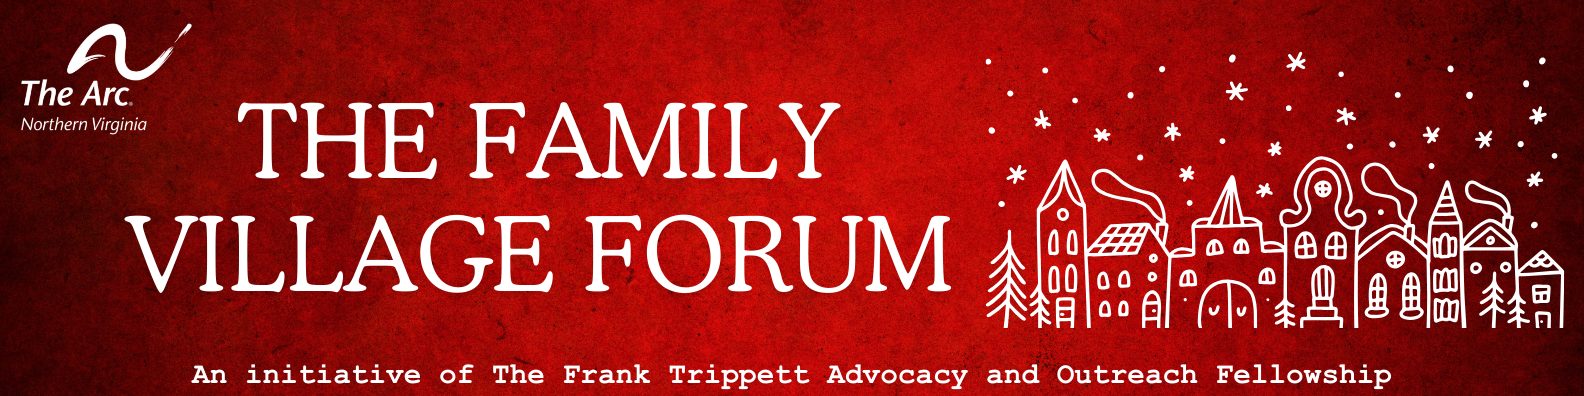 white text on a deep red background that says "The Family Village Forum" next to a outline drawing of a village.